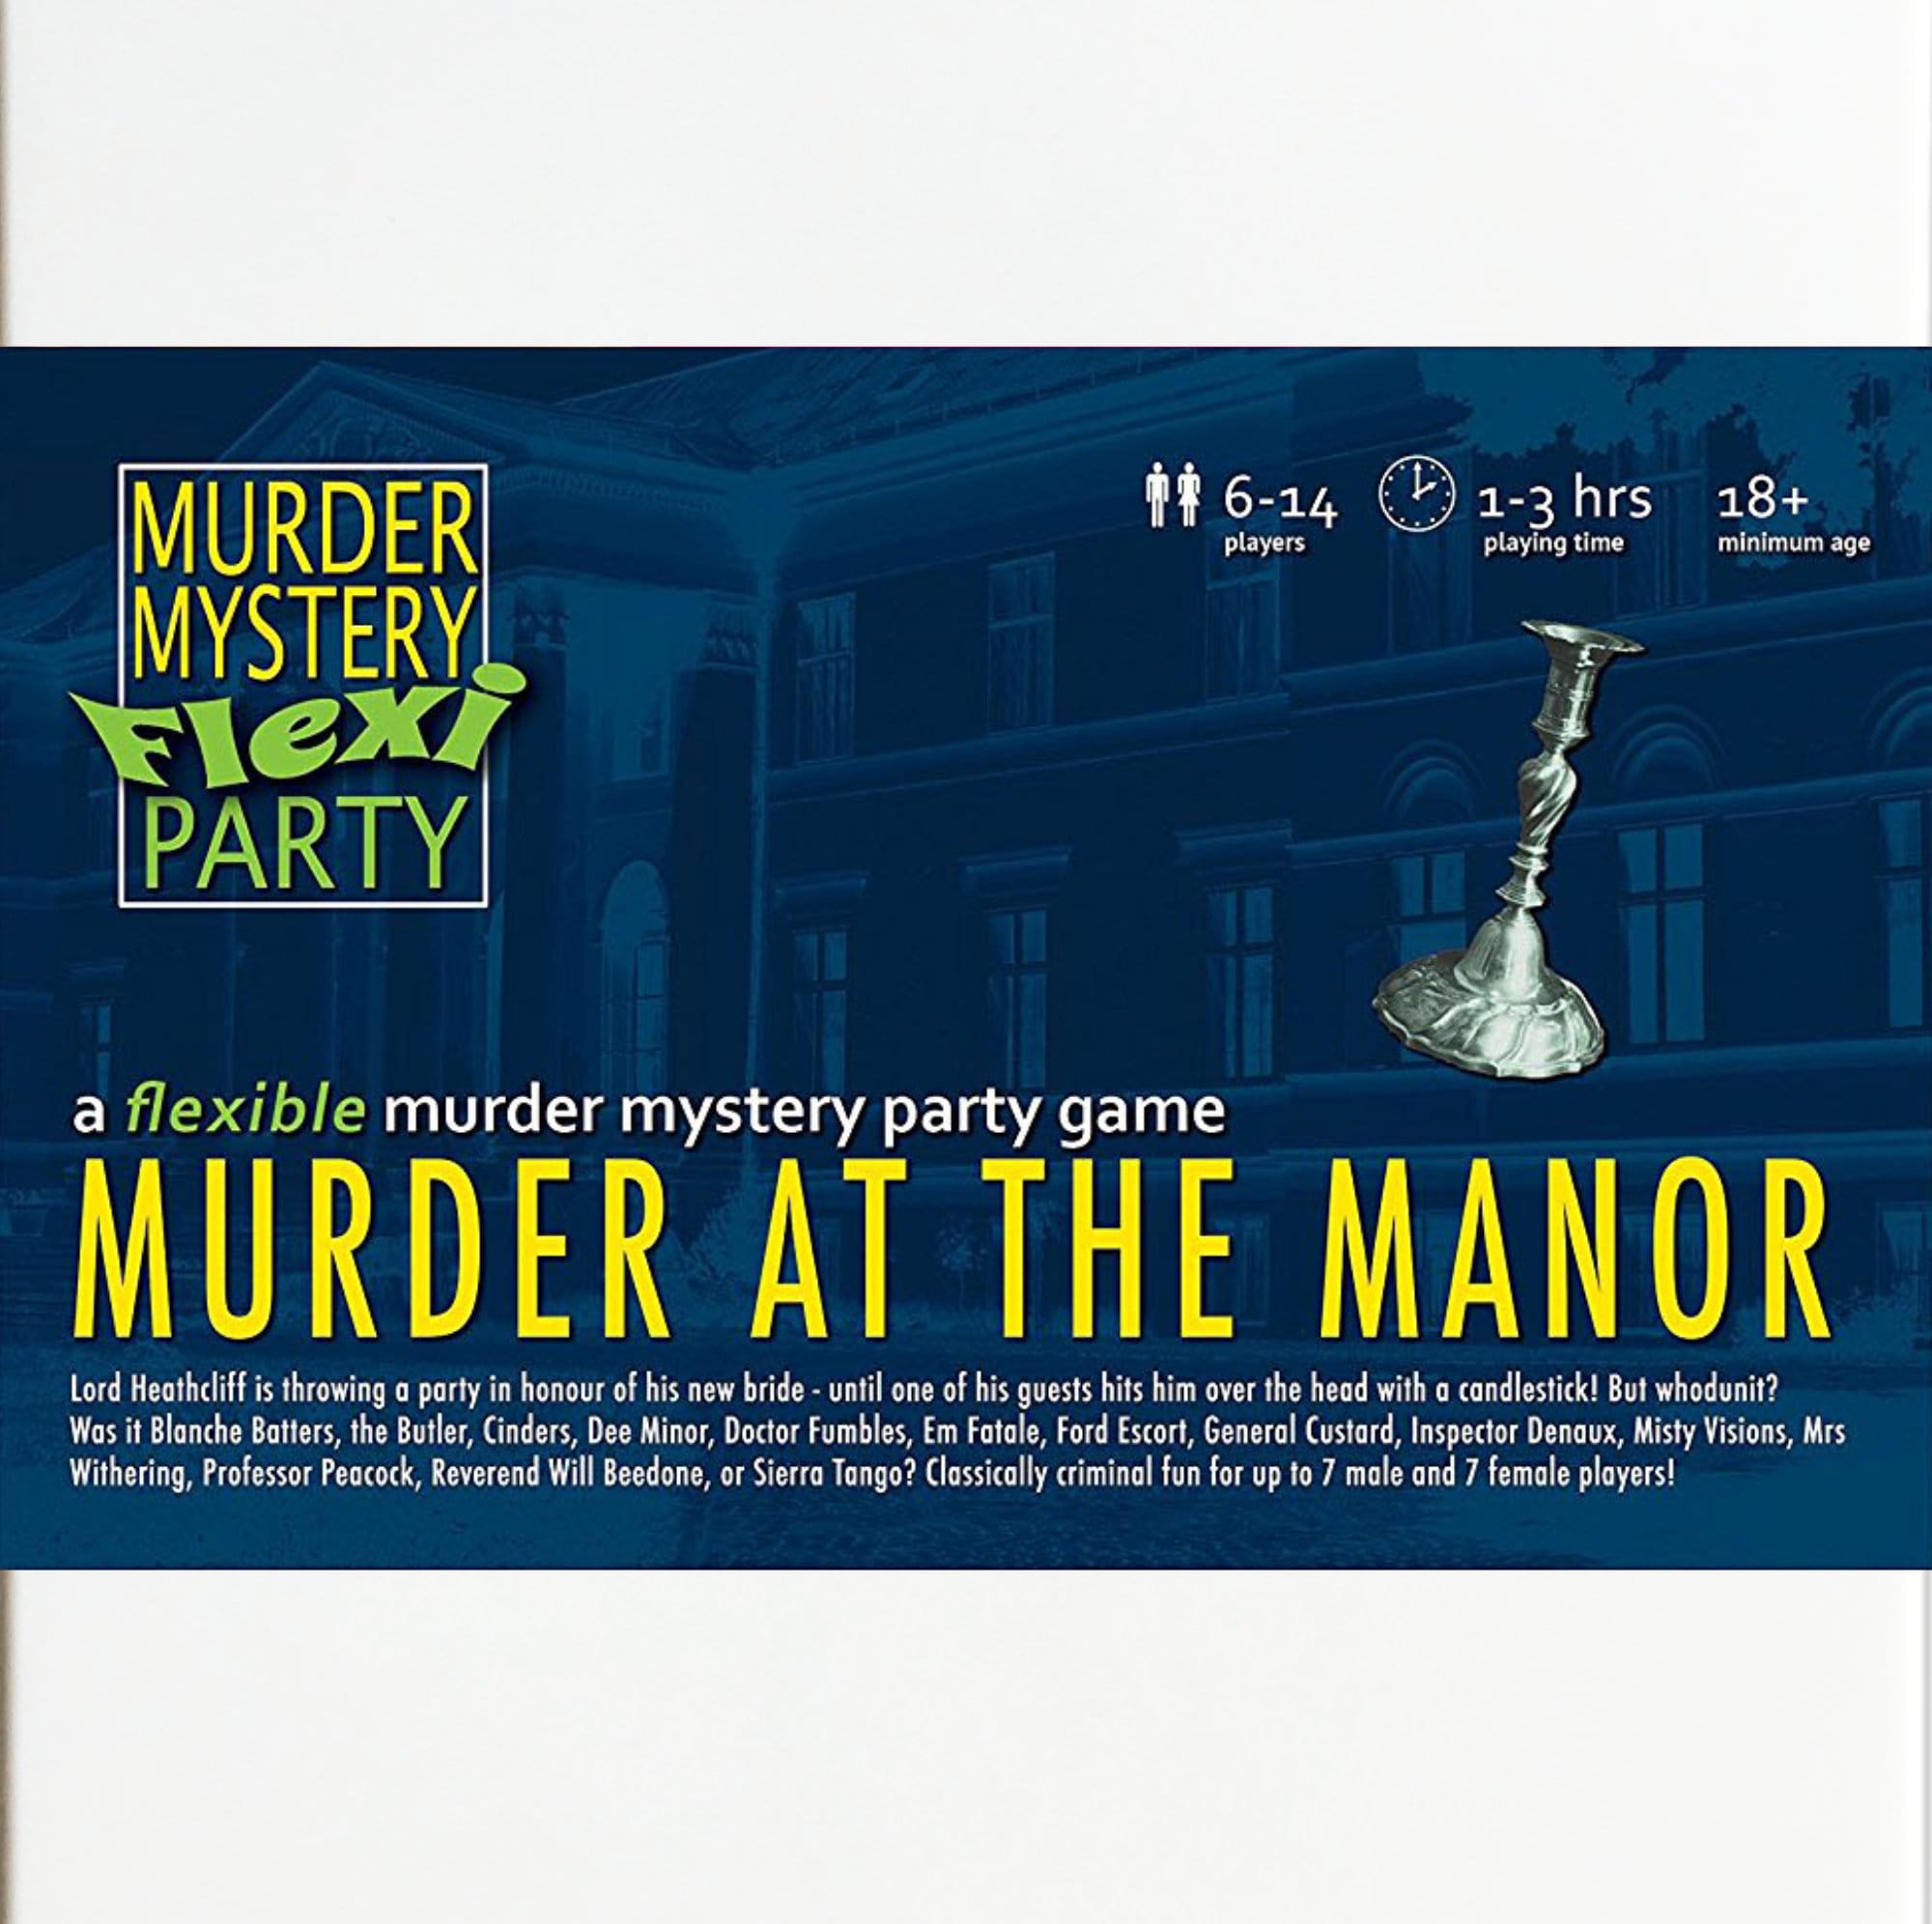 Talking Tables Reusable Murder Mystery Dinner Party Game Kit 1920s Theatre  Themed Host Your Own Games Night at Halloween 3 Alternative Endings